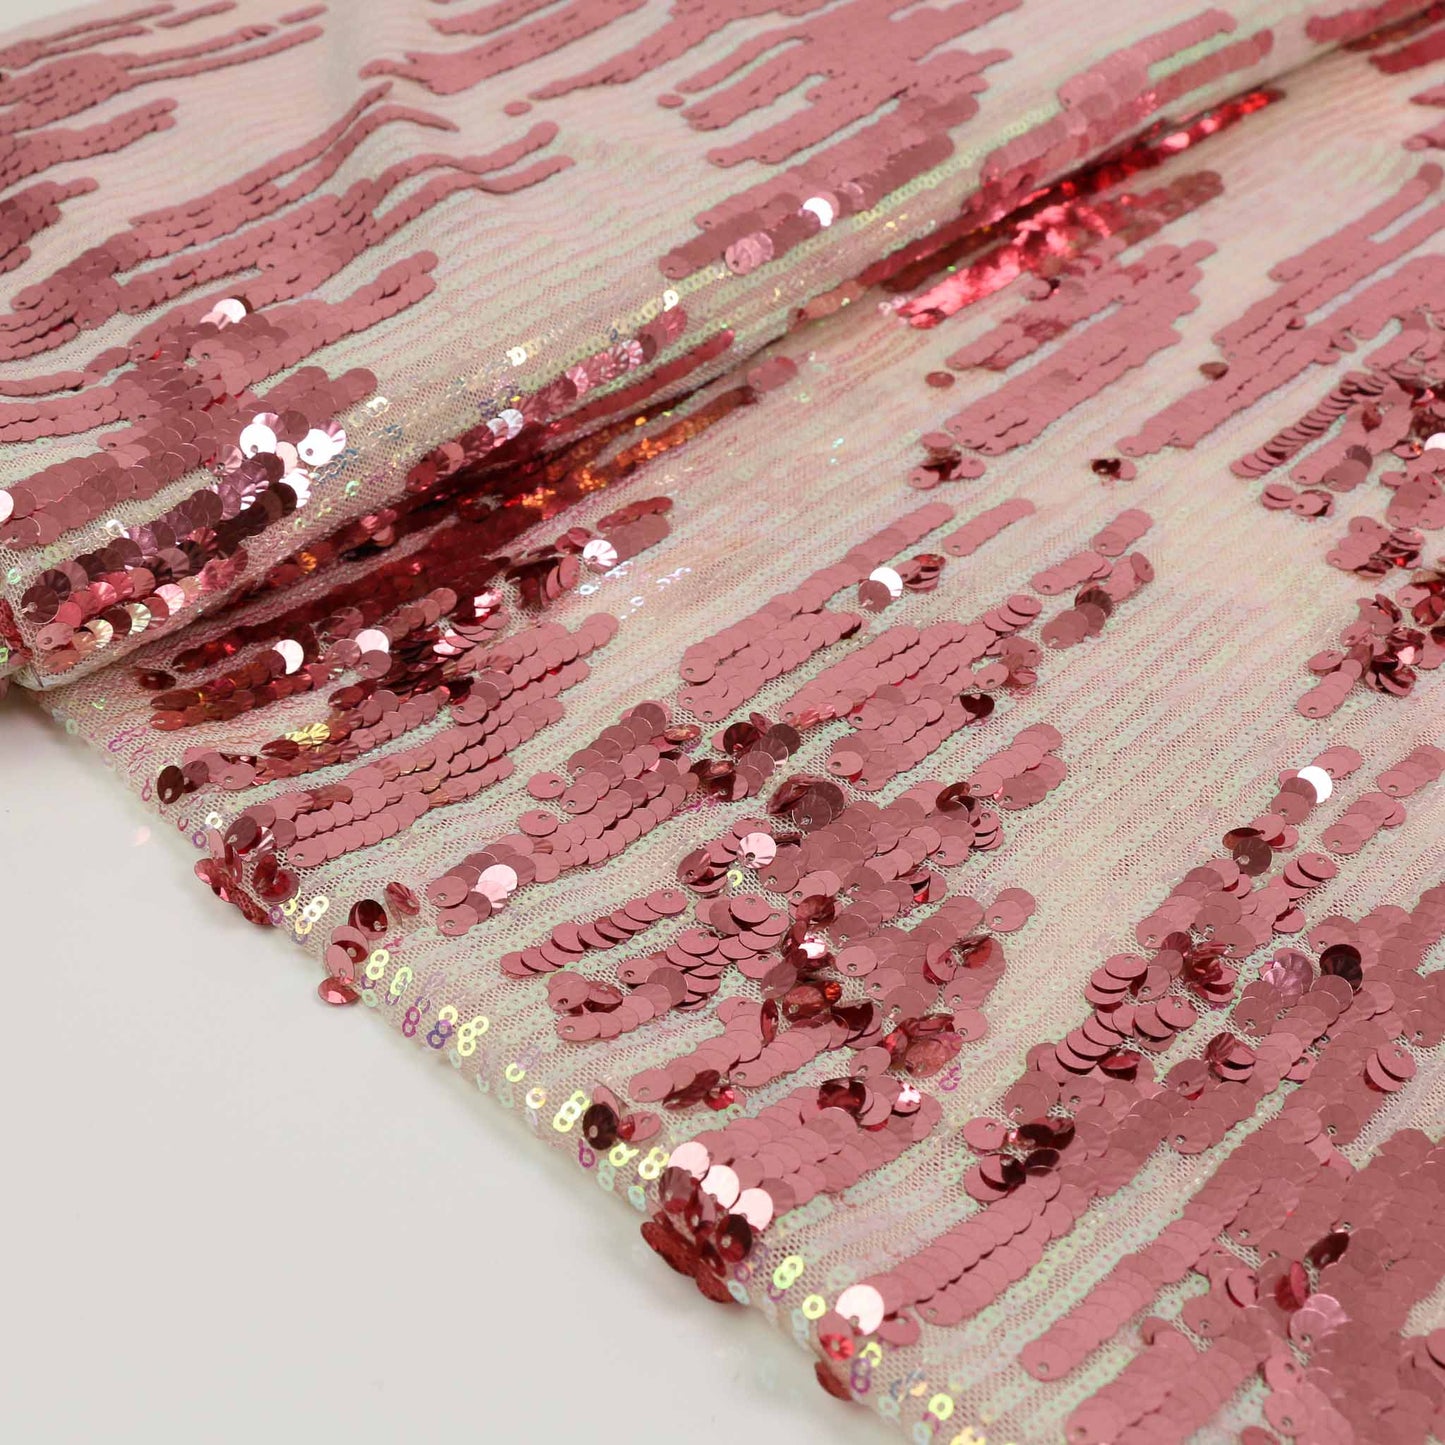 Stretchy Sequin Fabric - Pink, Blue, iridescent